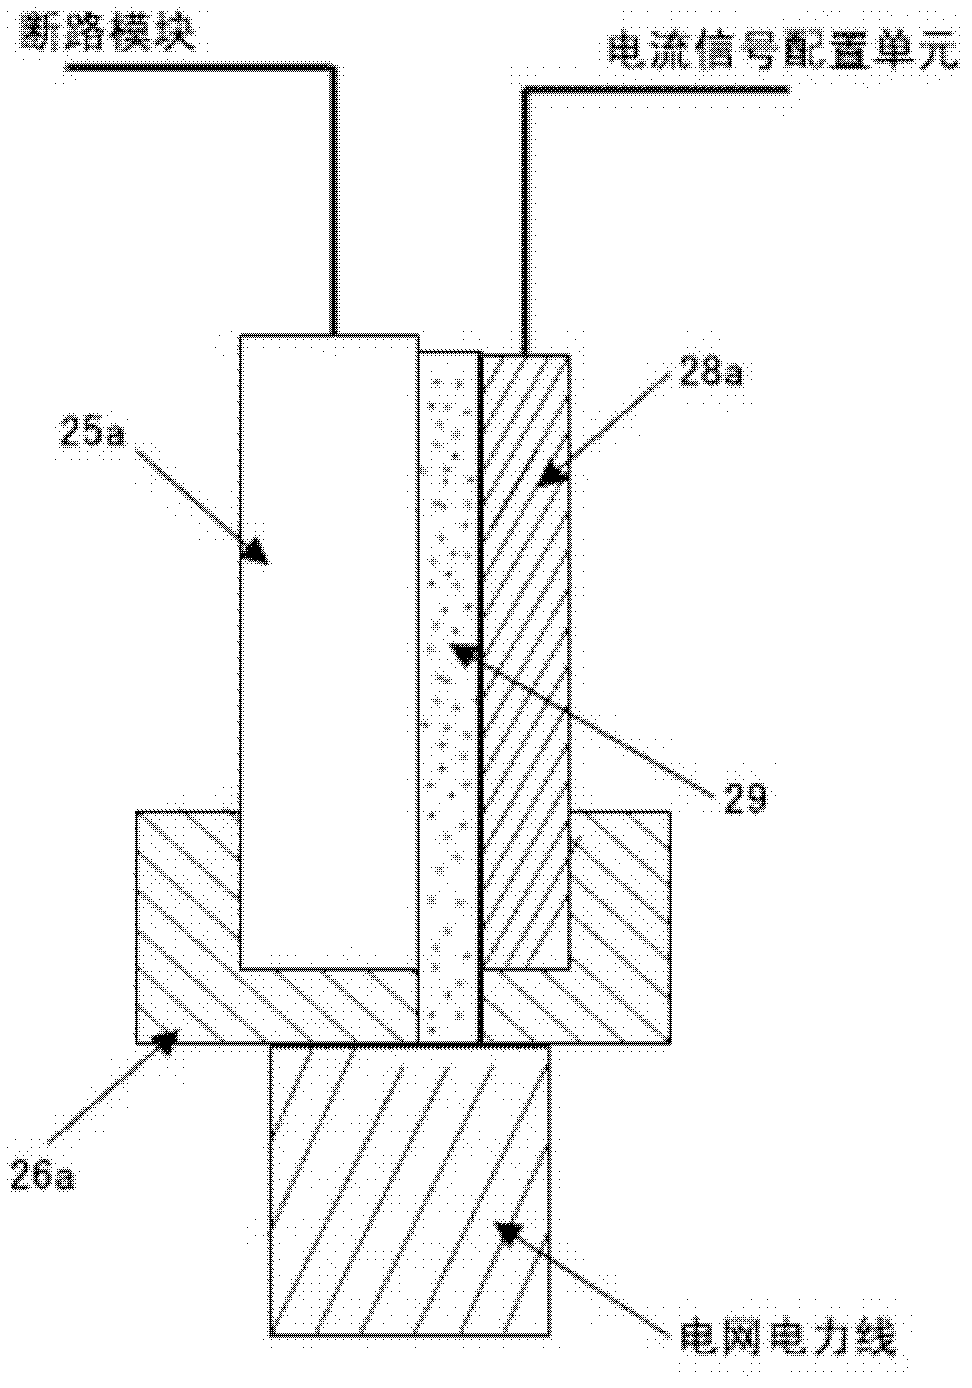 Intelligent integral multifunctional electric energy meter and method for controlling load by same